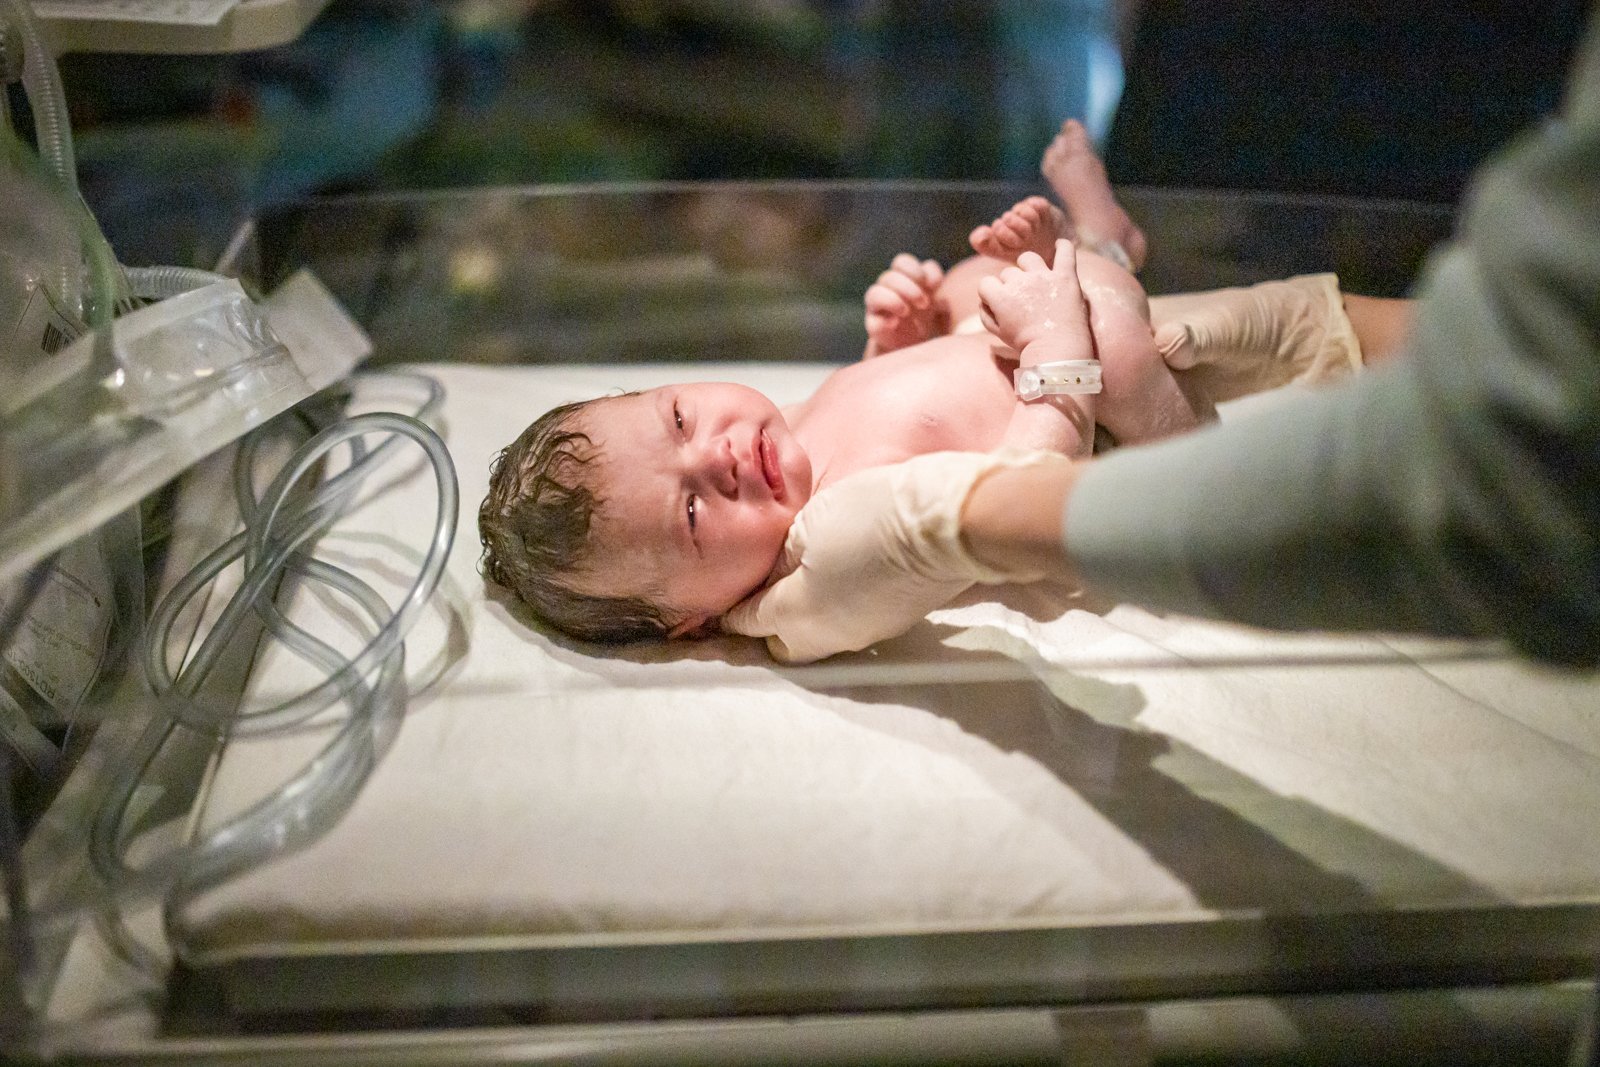 A new born baby is weighed on a scale